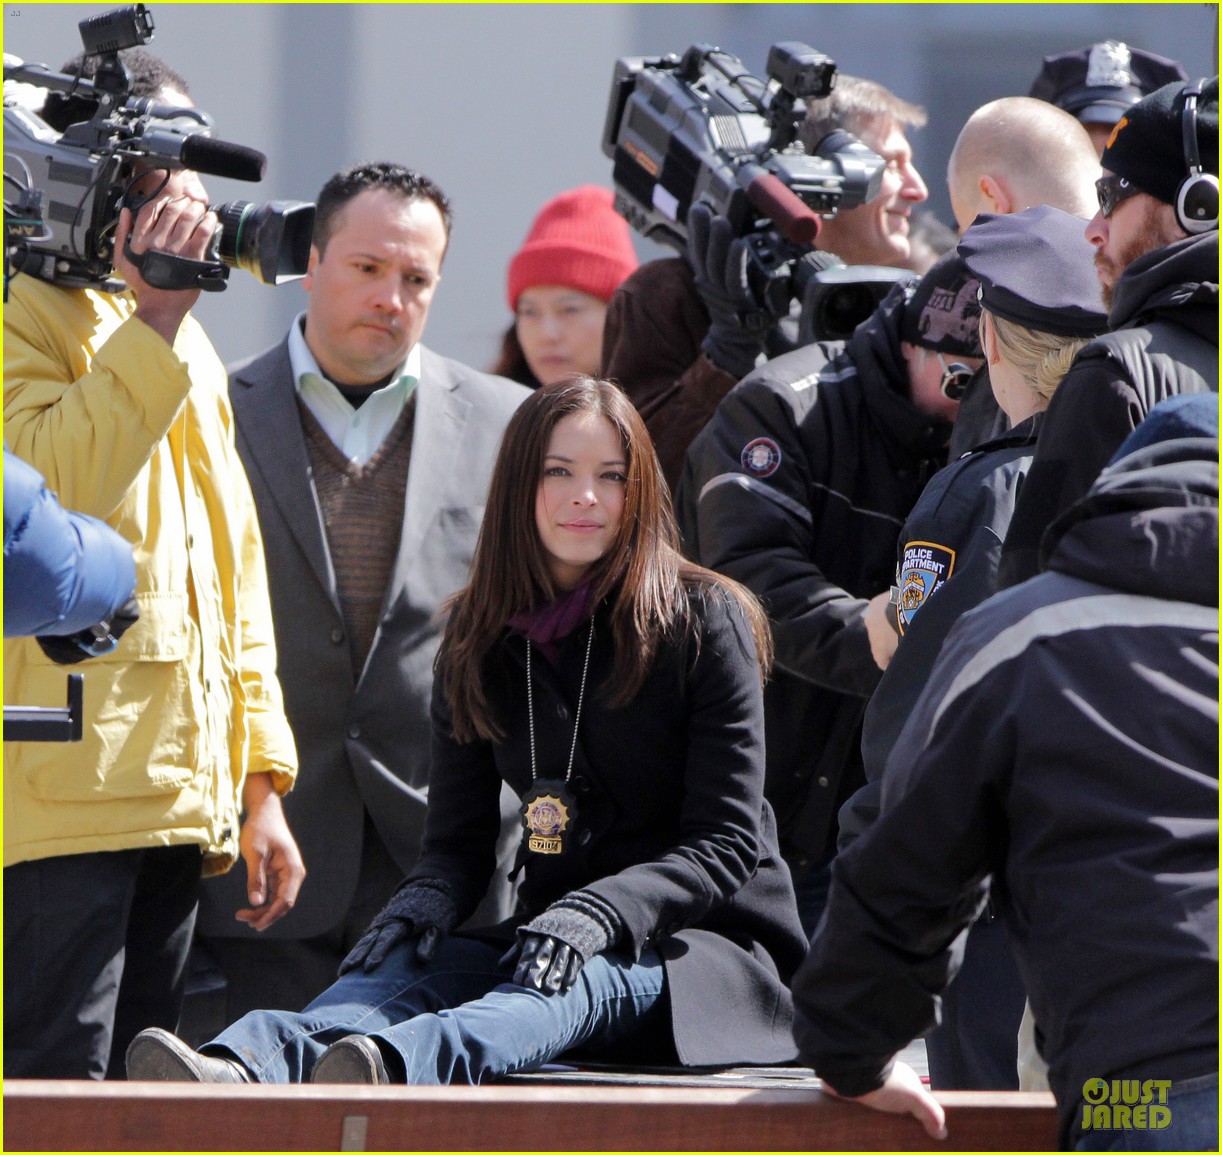 Kristin Kreuk on the set of Beauty and the Beast in Toronto